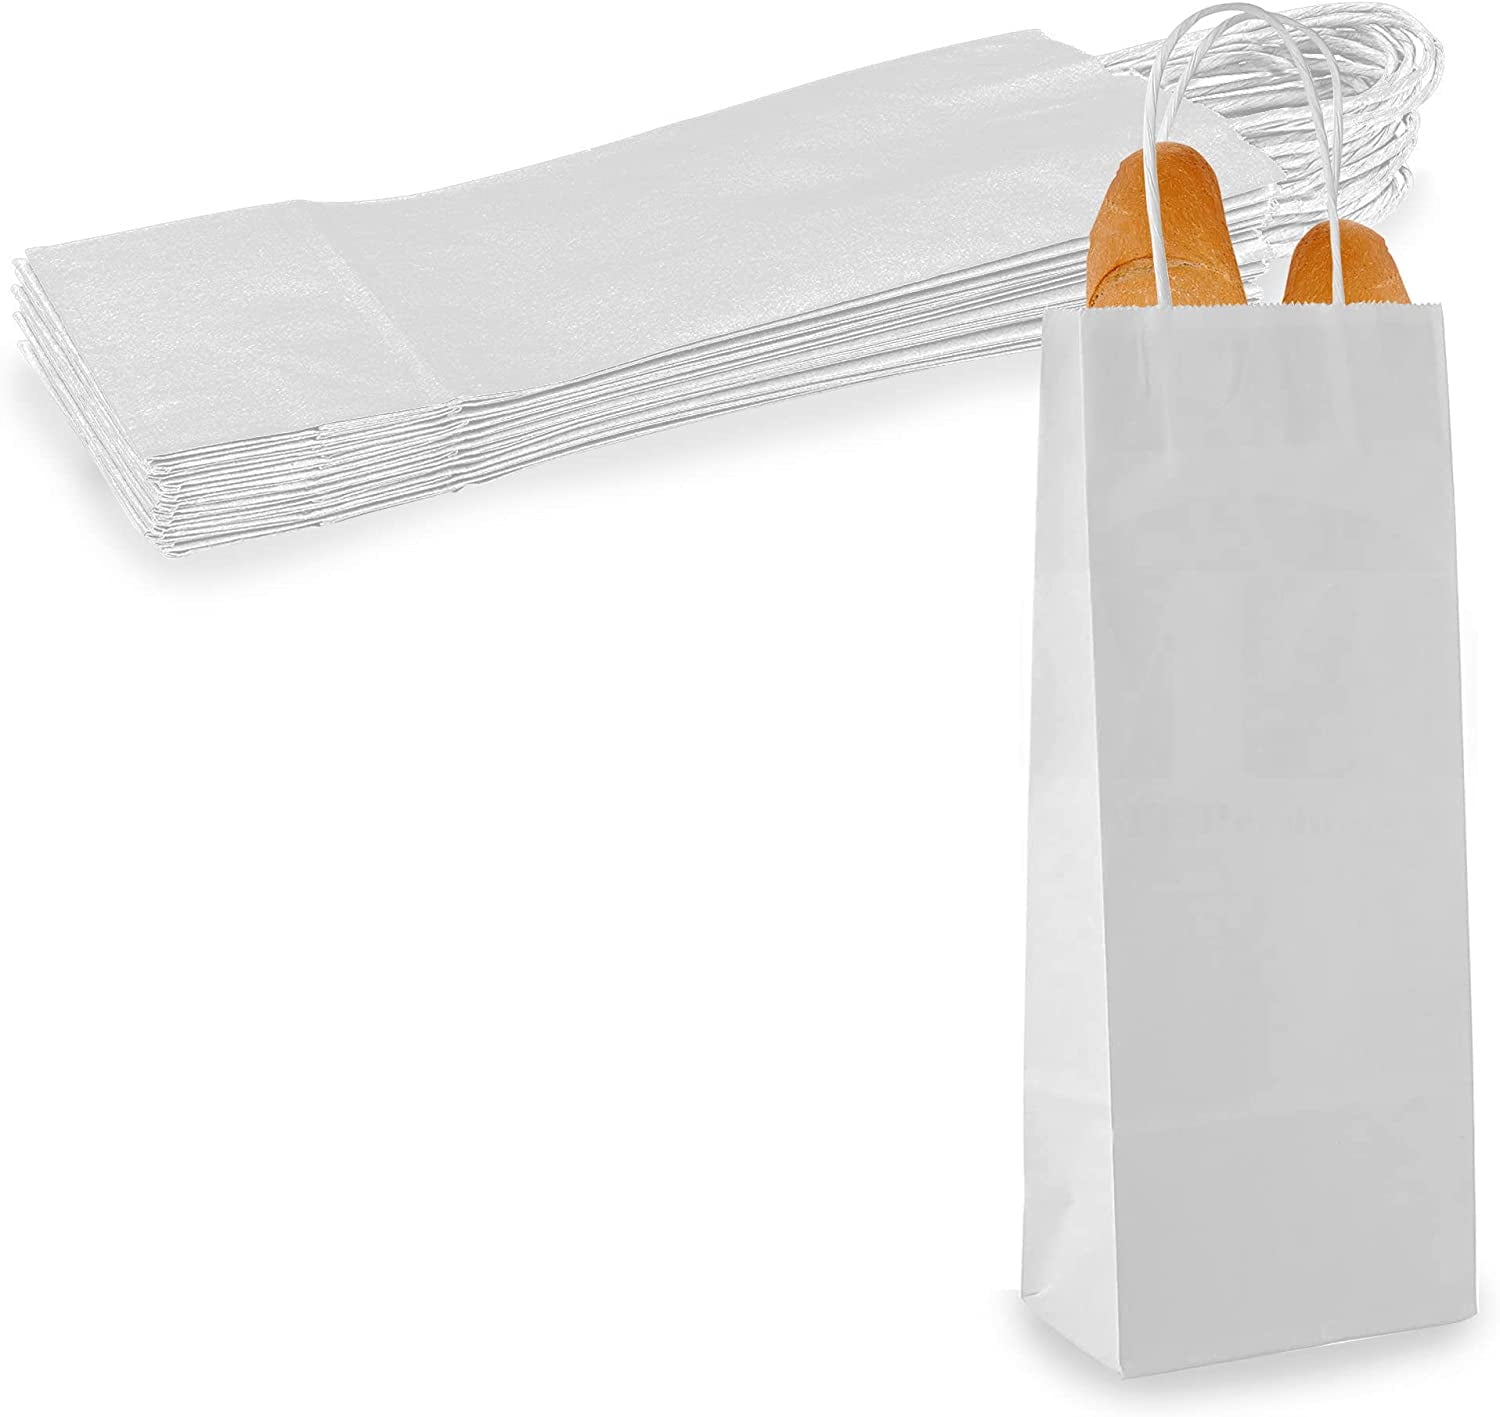 Gift Bags 10x5x13 25pcs White Paper Bags Gift Bags With Handles Bulk  Shopping Bags, Merchandise Bags, Retail Bags, Party Favor Bags, 100%  Recyclable P